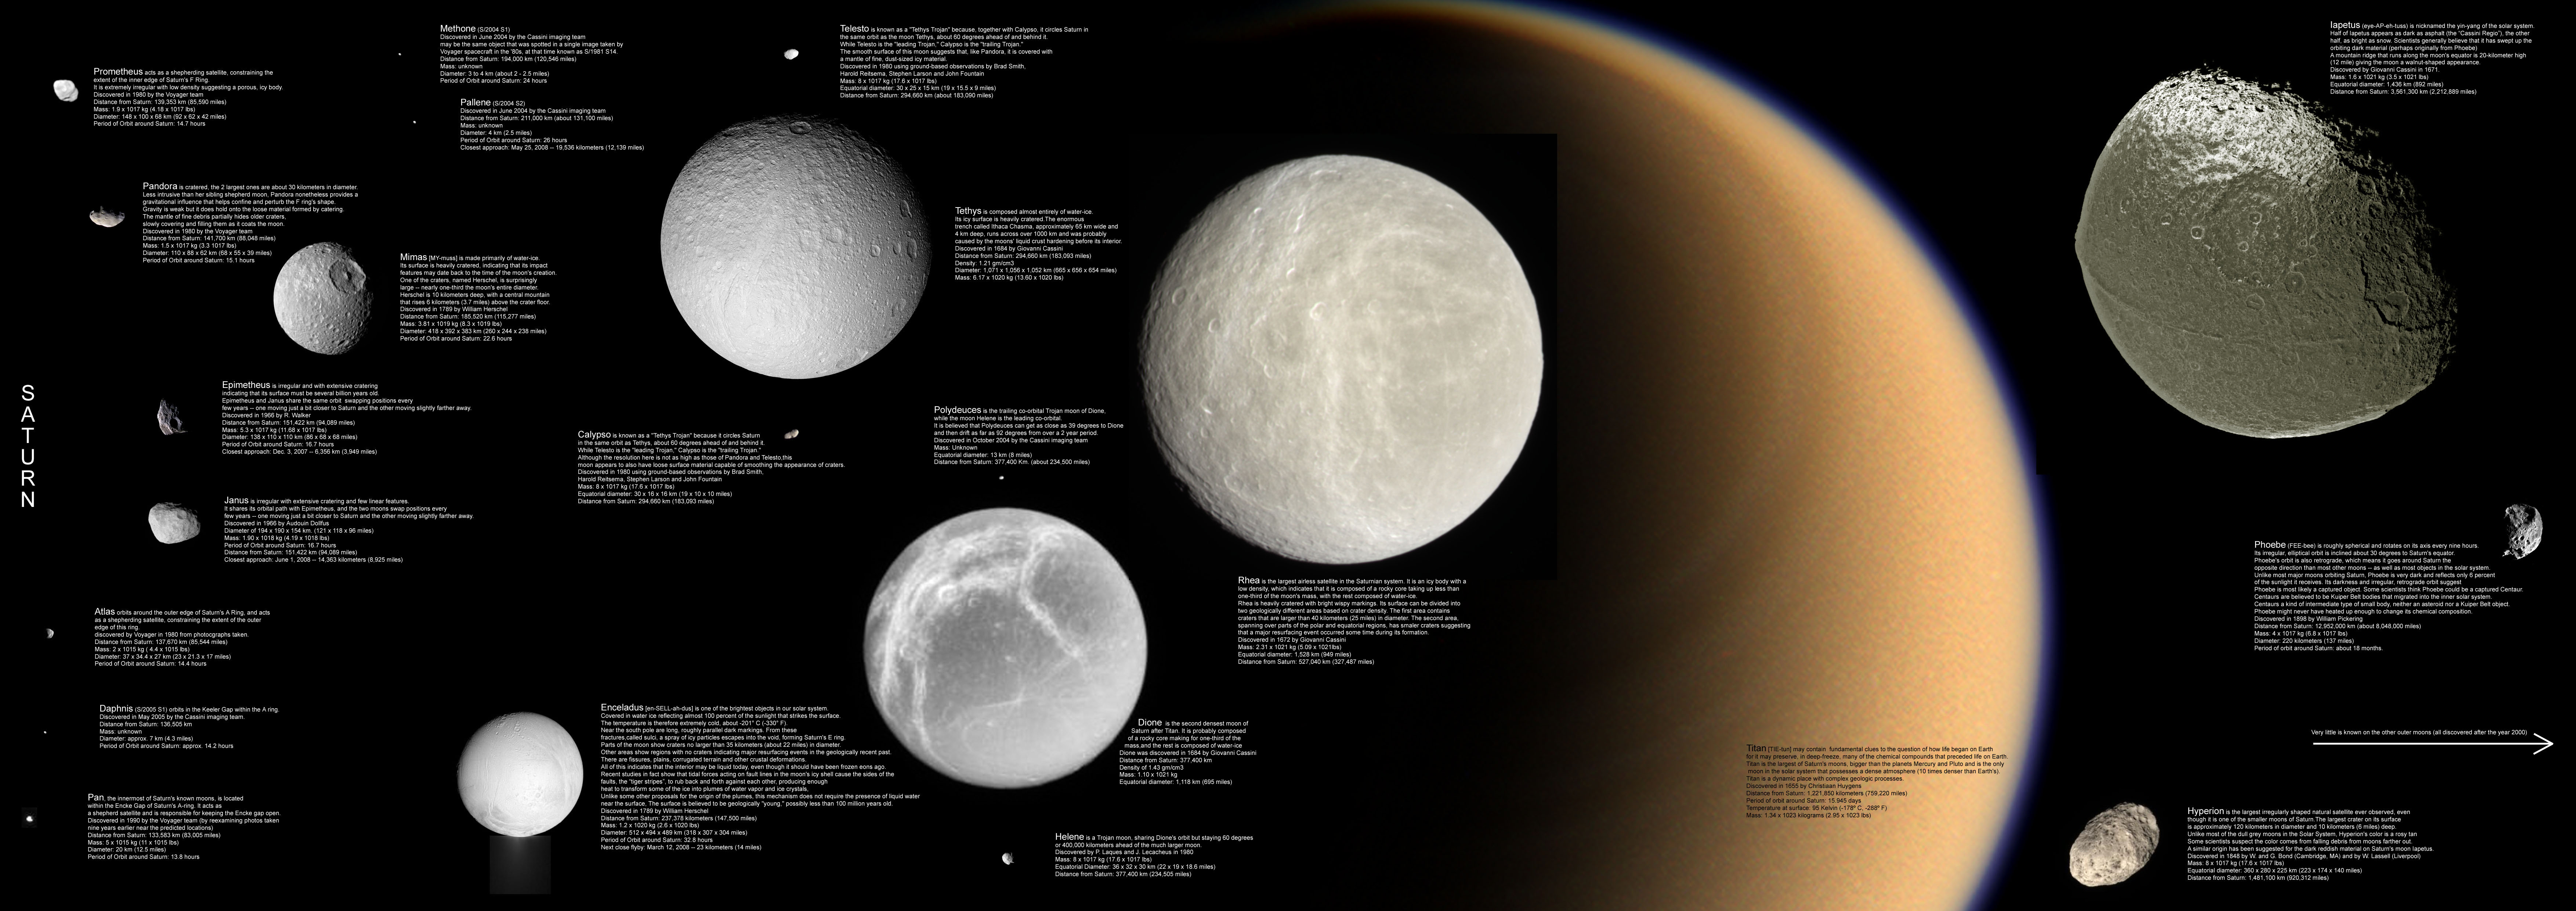 Moons of Saturn 2007